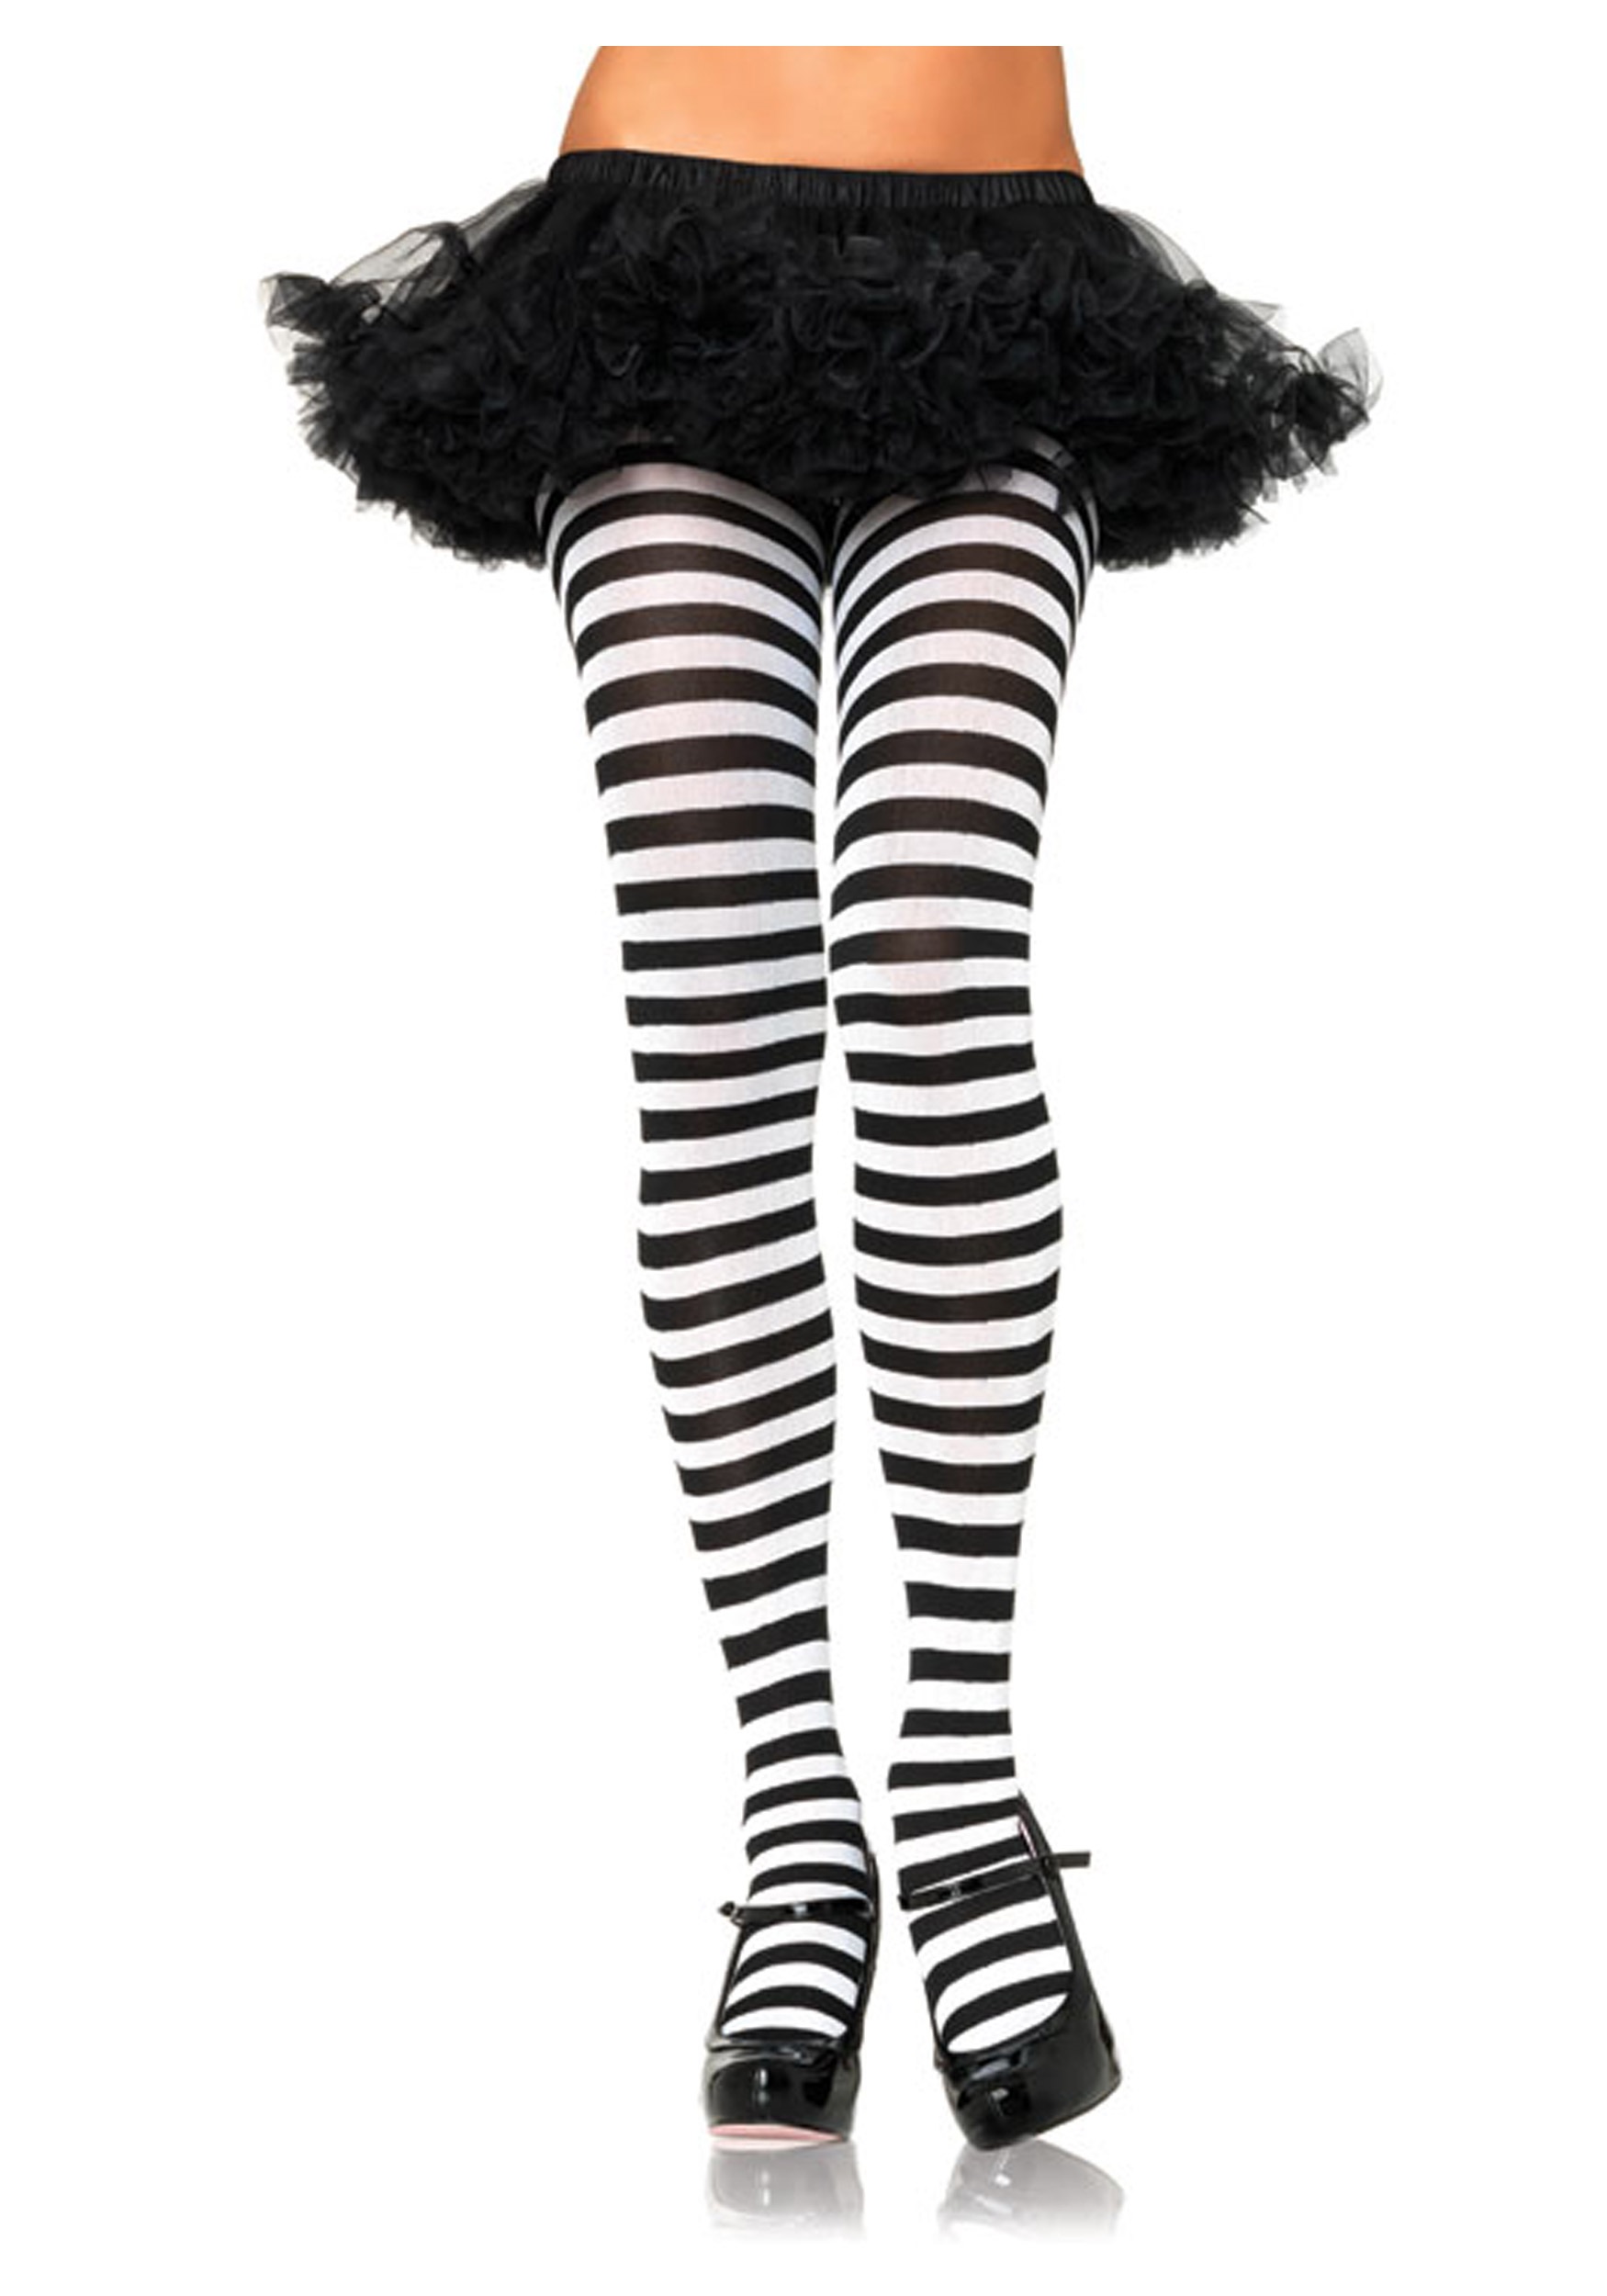 https://images.halloween.com/products/13706/1-1/plus-size-black--white-striped-tights.jpg